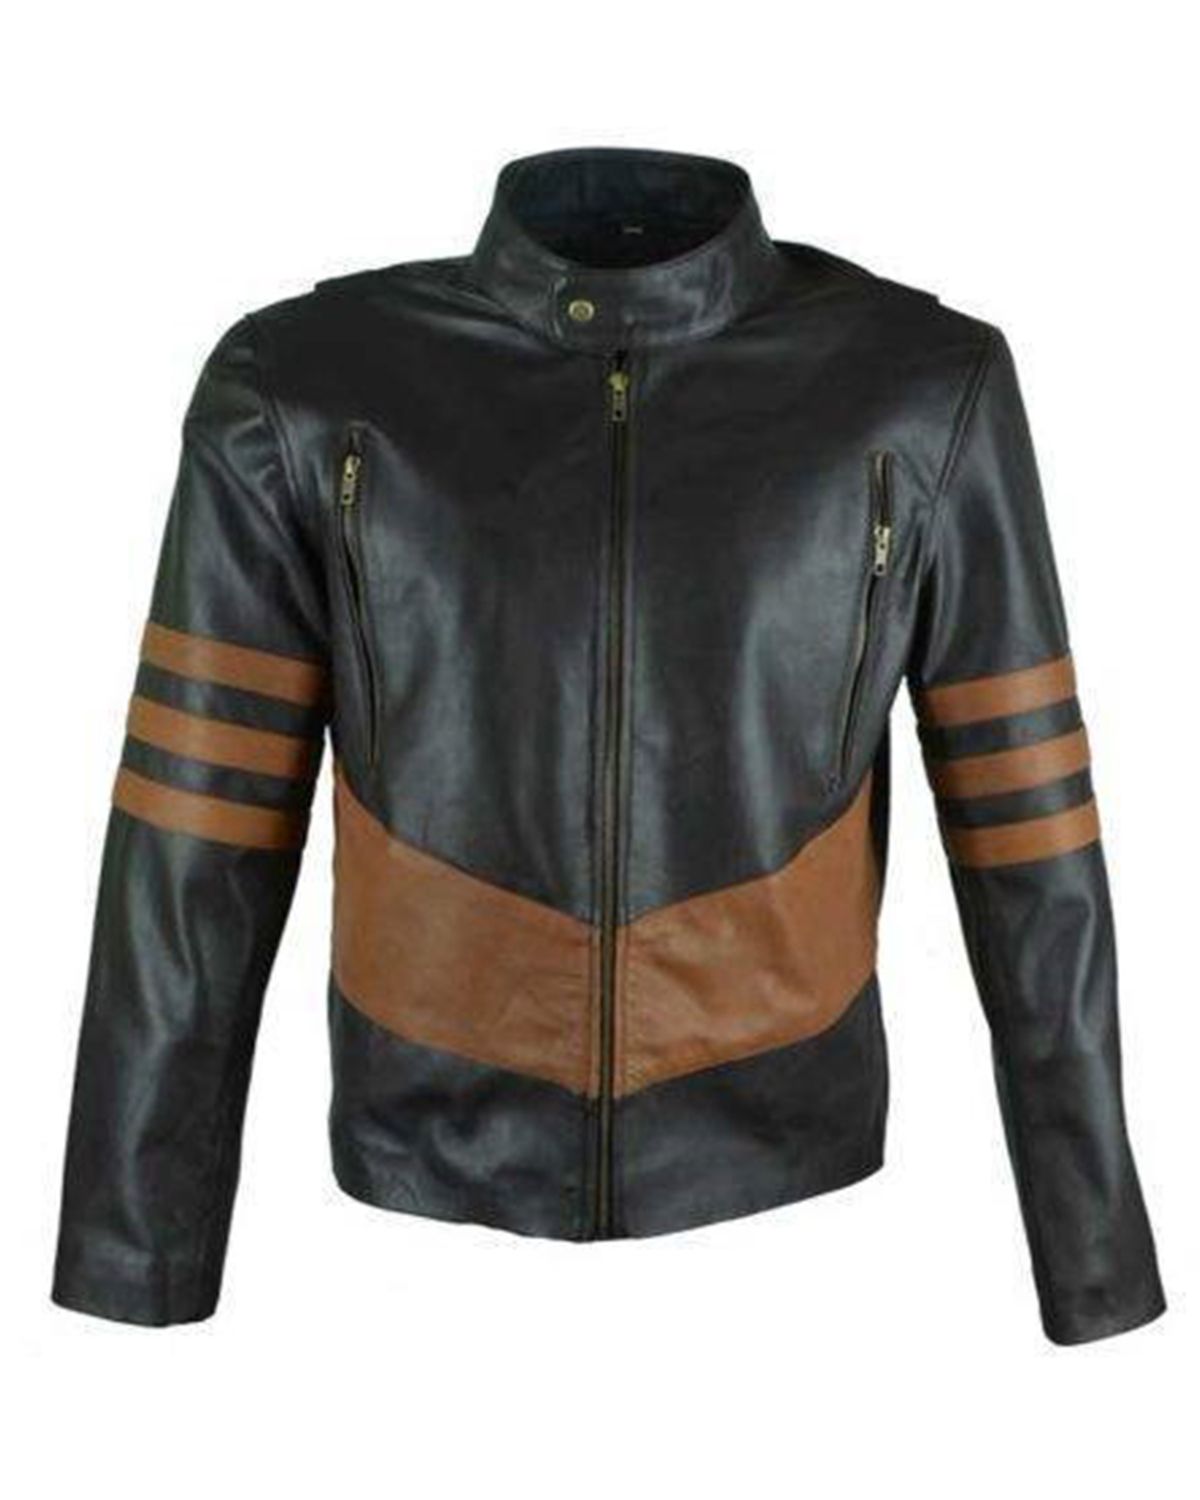 Men's Black Cafe Racer With Brown Stripes Leather Jacket by SCIN